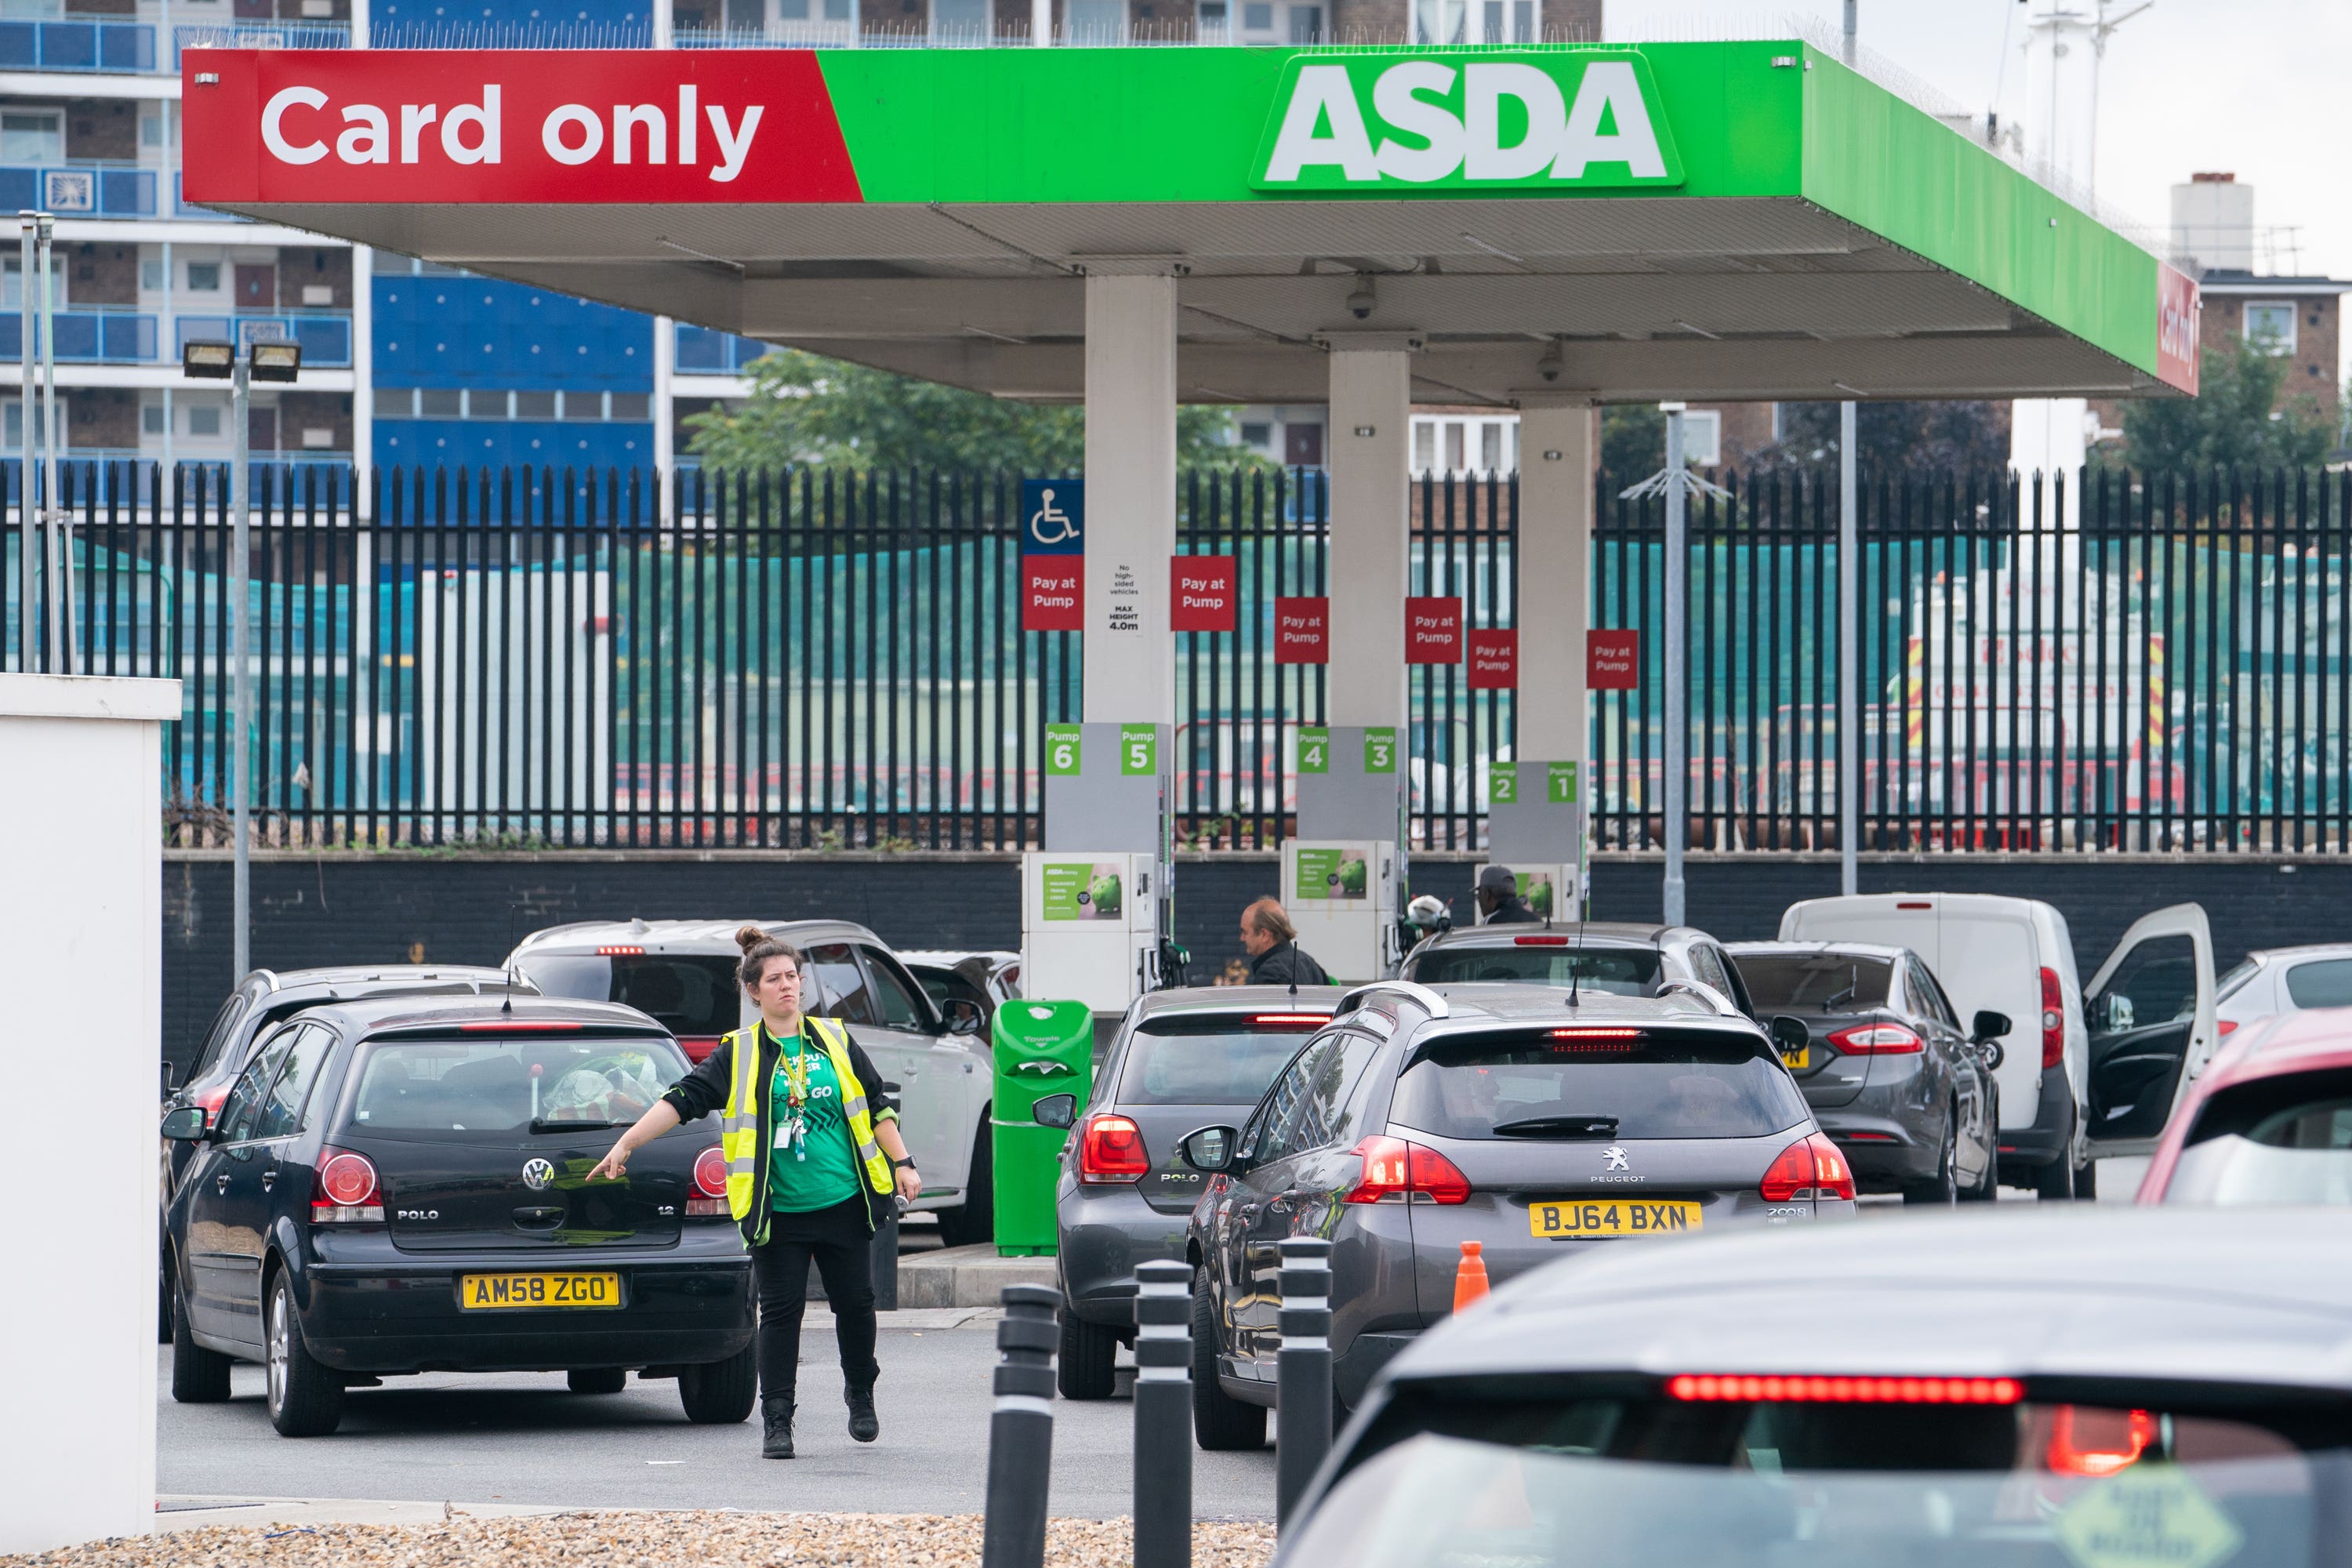 Asda has been fined for failing to provide timely information on fuel prices